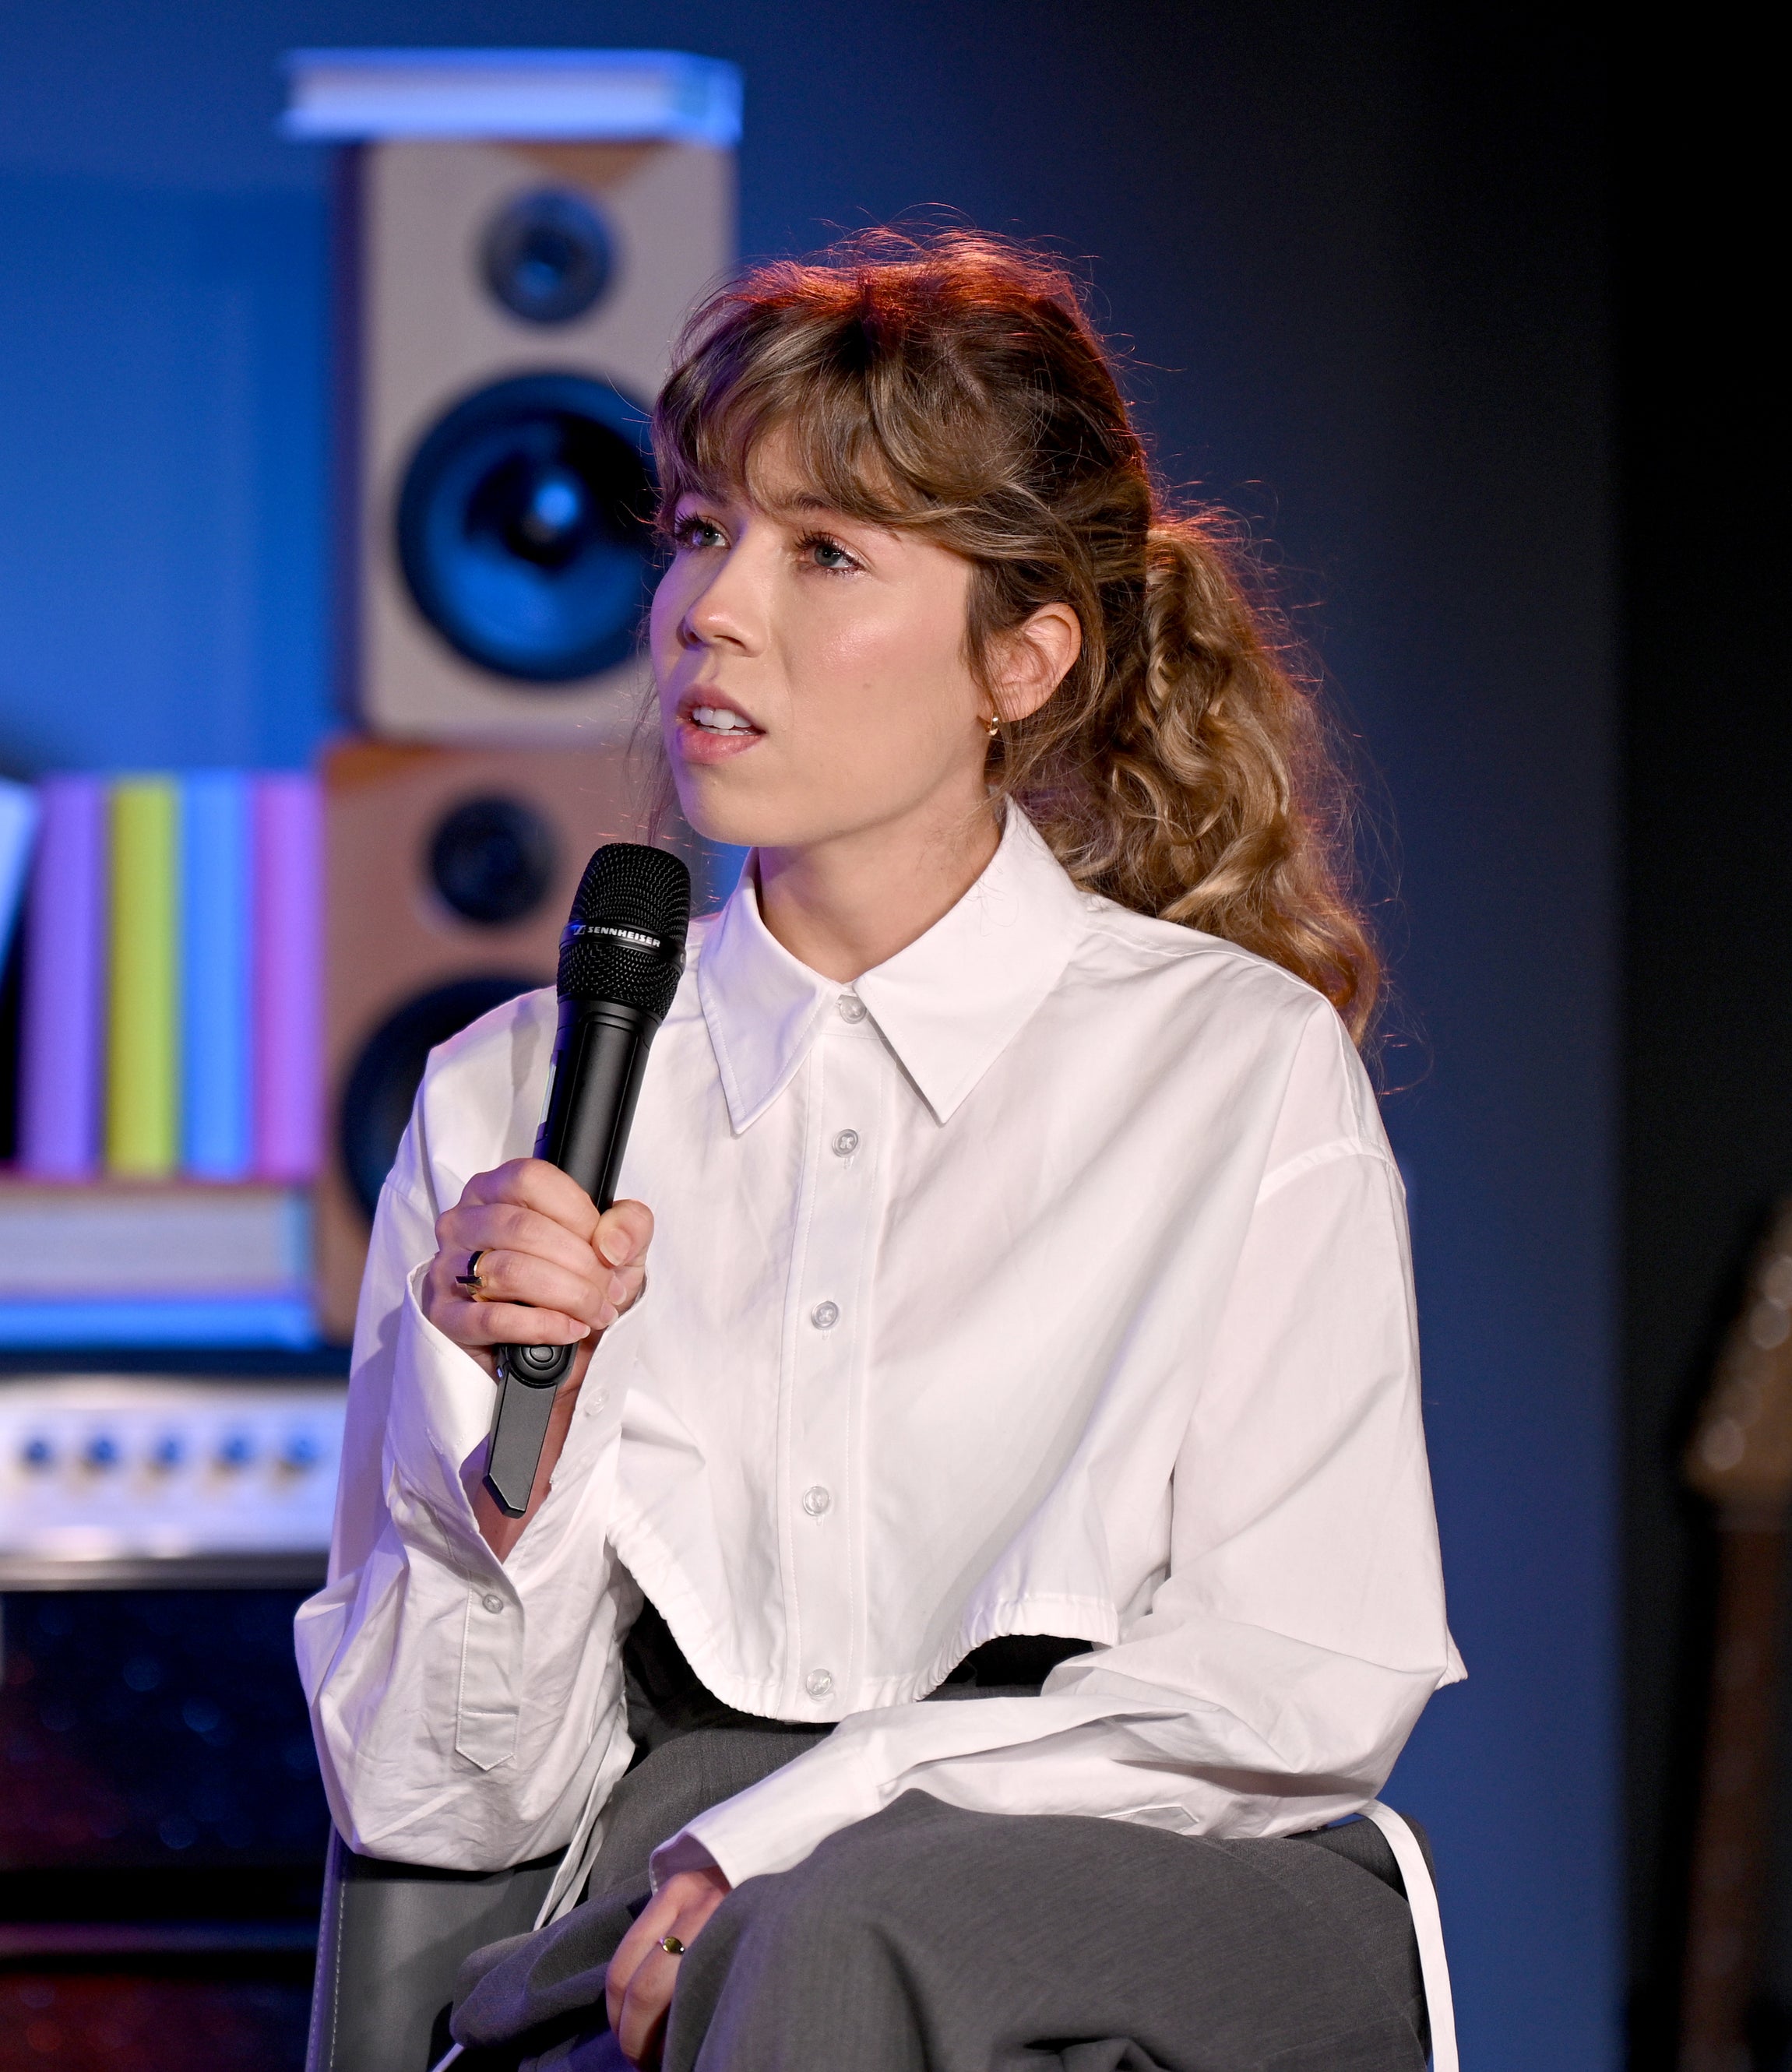 Jennette McCurdy sitting and speaking into a microphone, dressed in a shirt and dark pants, with a background of stacked books